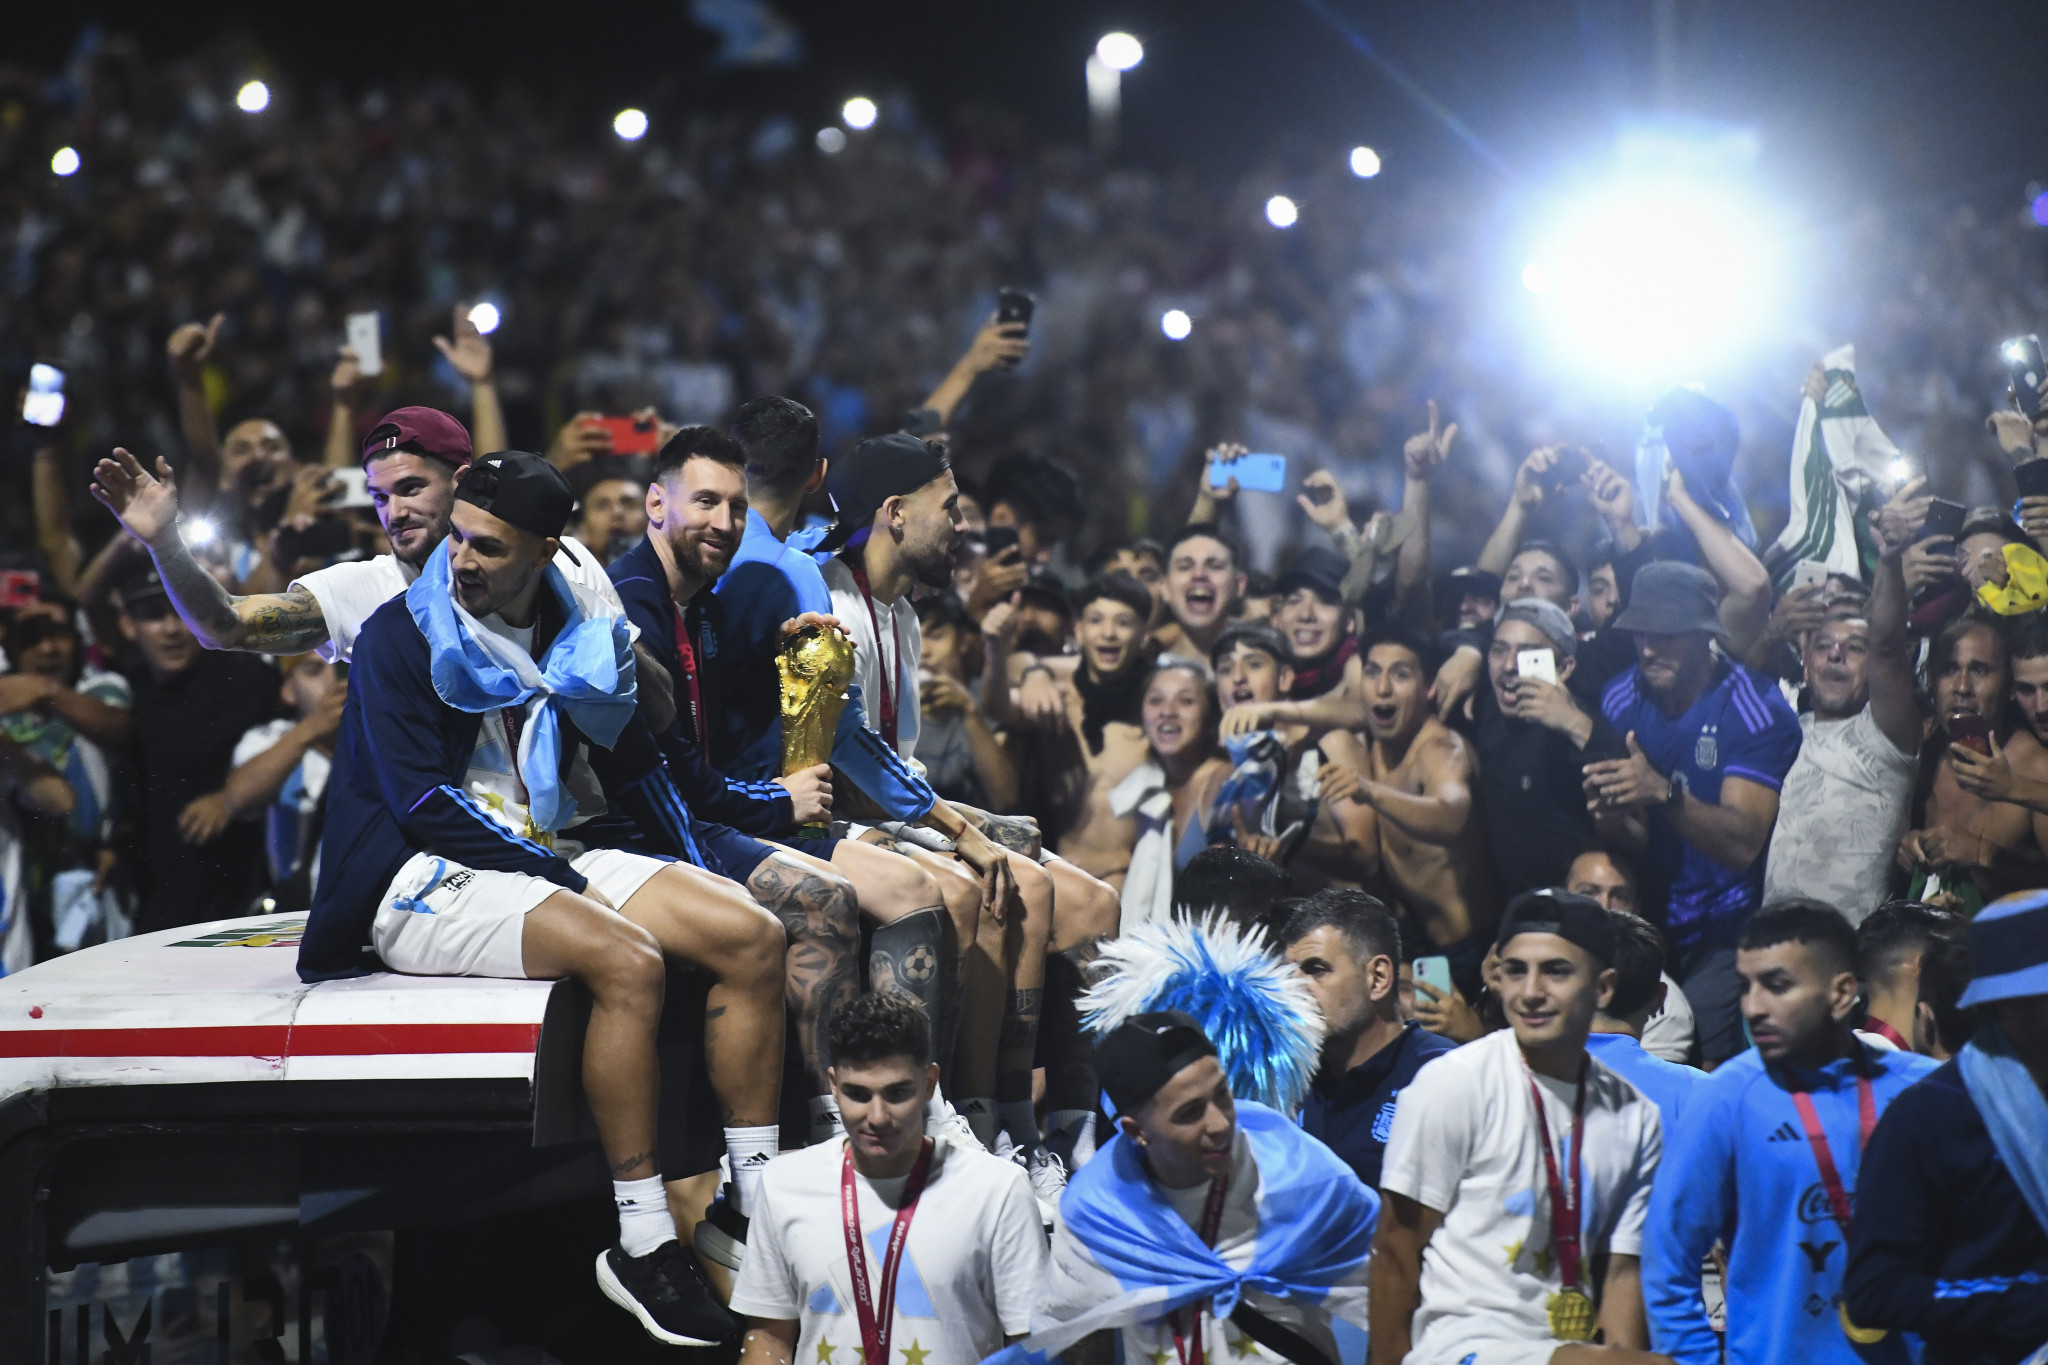 Argentina FIFA World Cup victory parade cut short due to security concerns